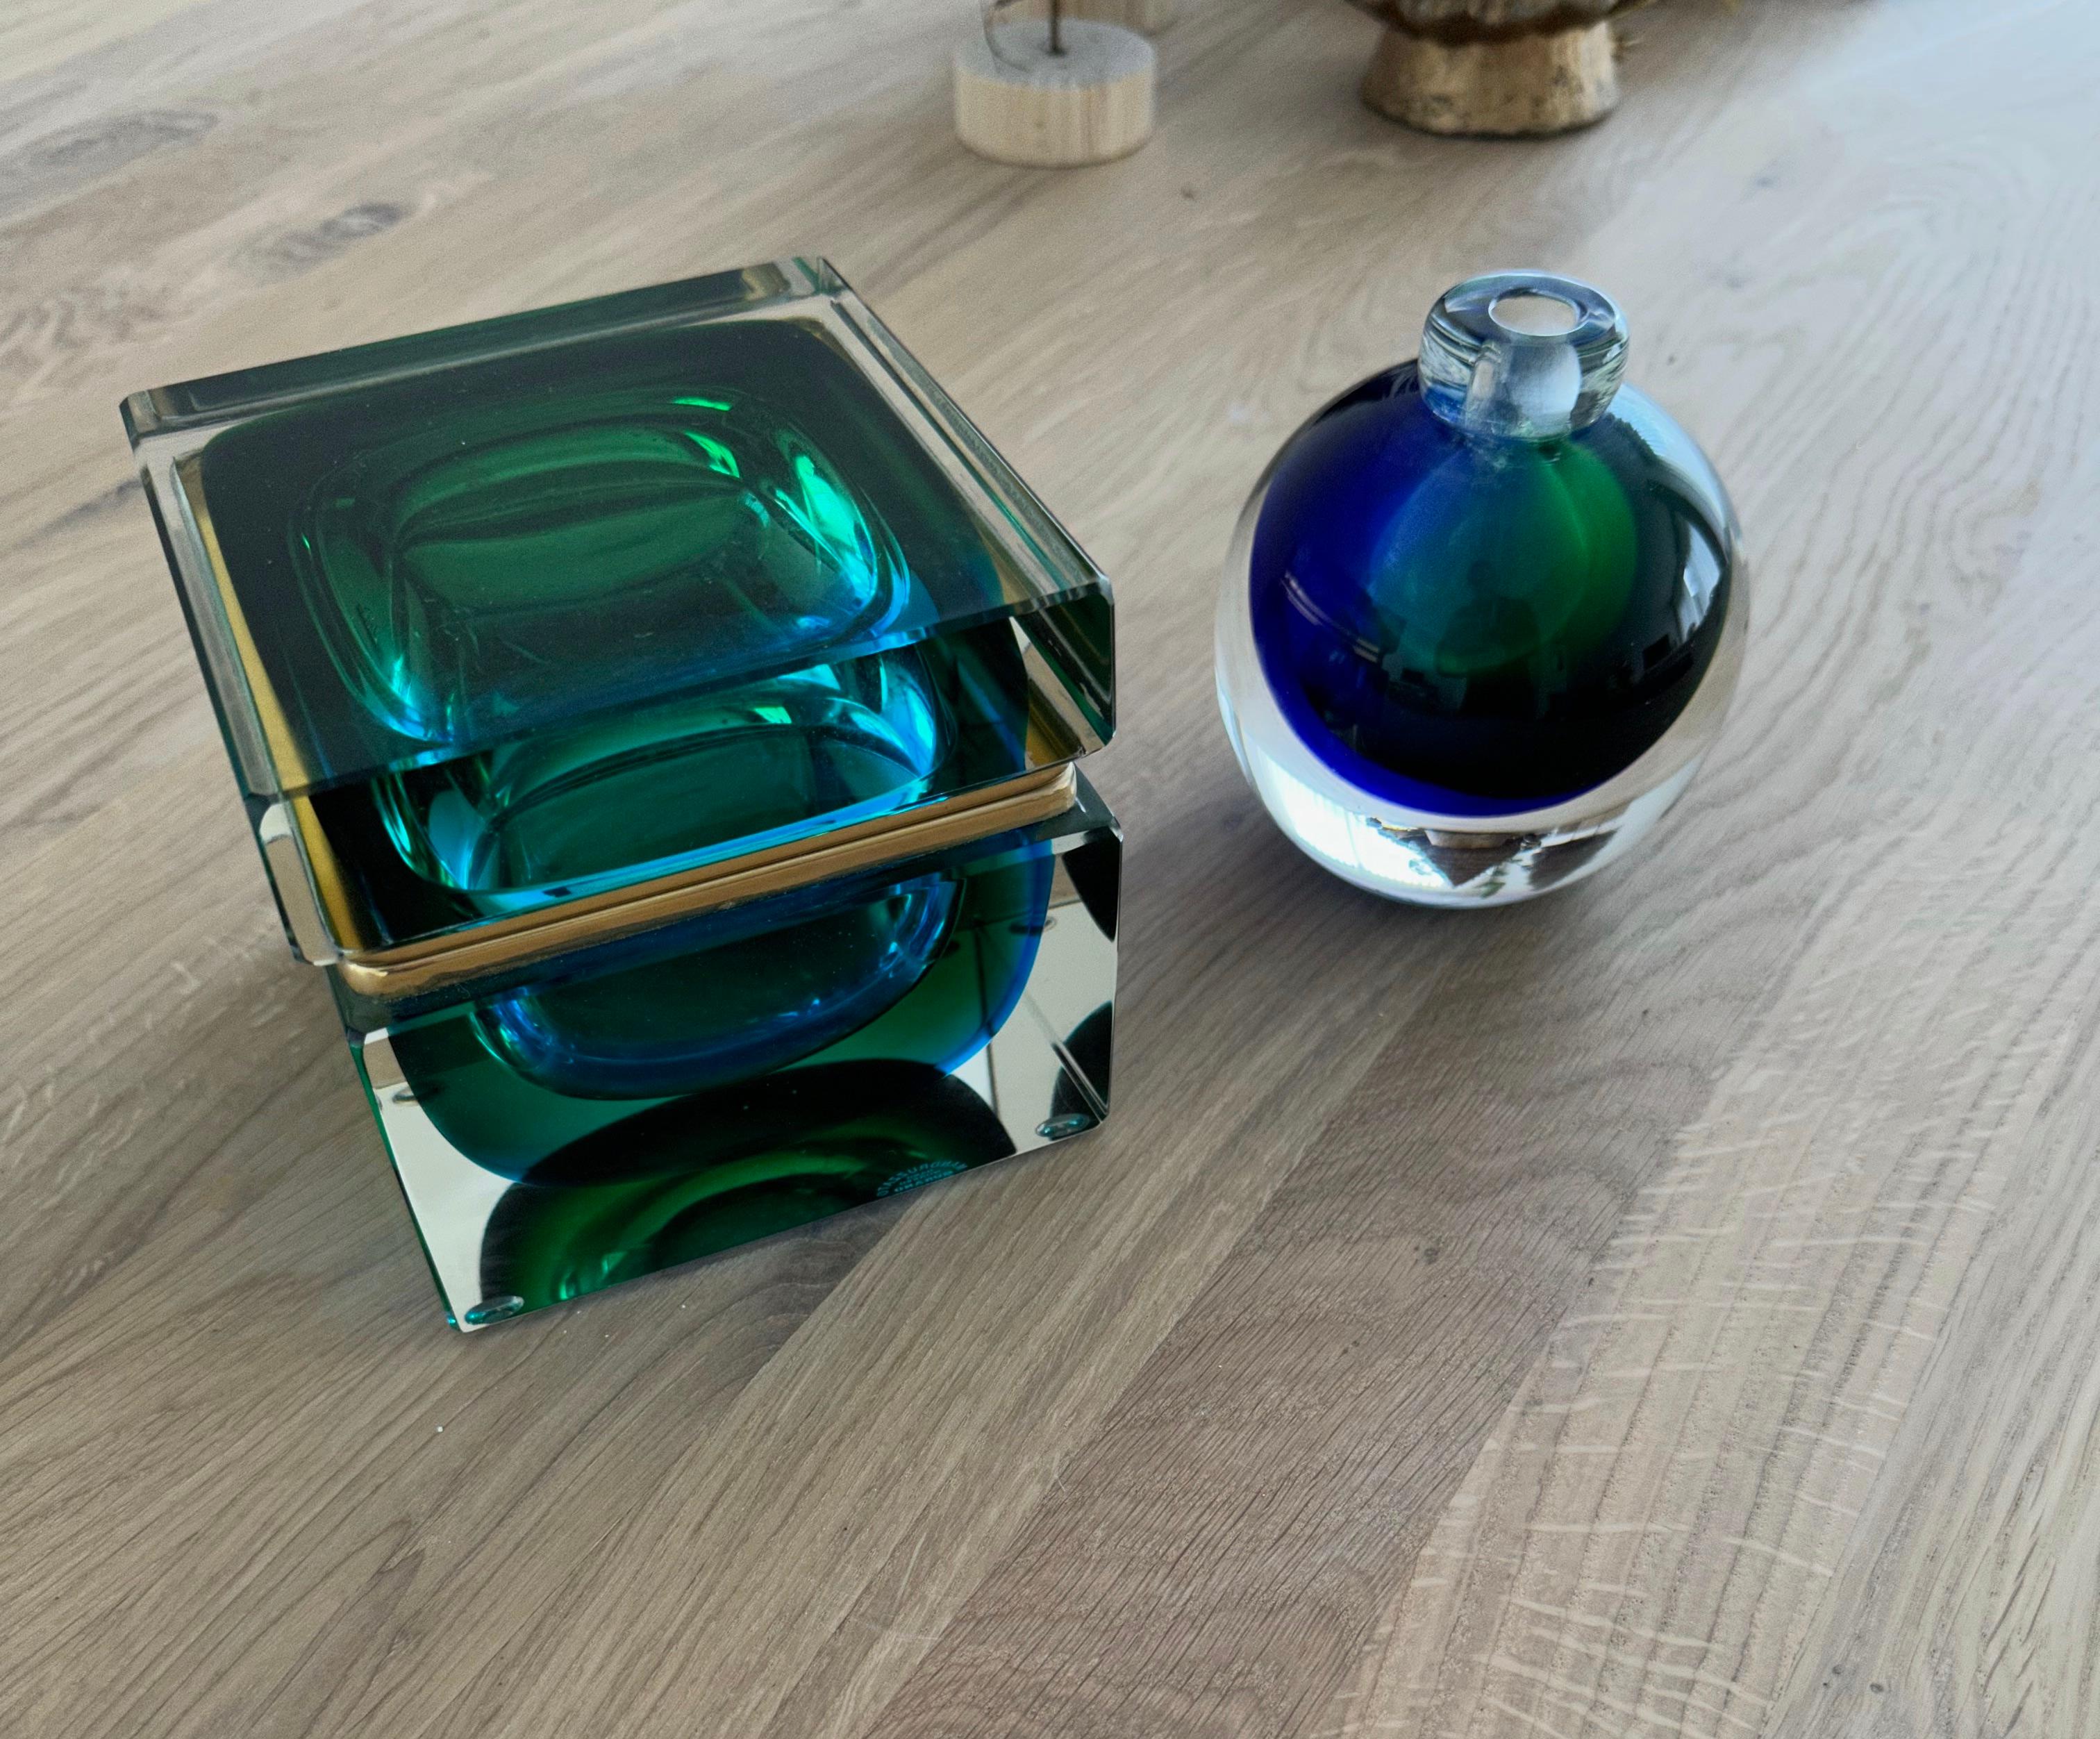 Mint condition and all handcrafted thick glass box, with a small vase made in Venice, Italy.

If you are looking for an exclusive and very stylish box for yourself or a loved one then this avantgardistic Italian work of beauty's from the 1970s